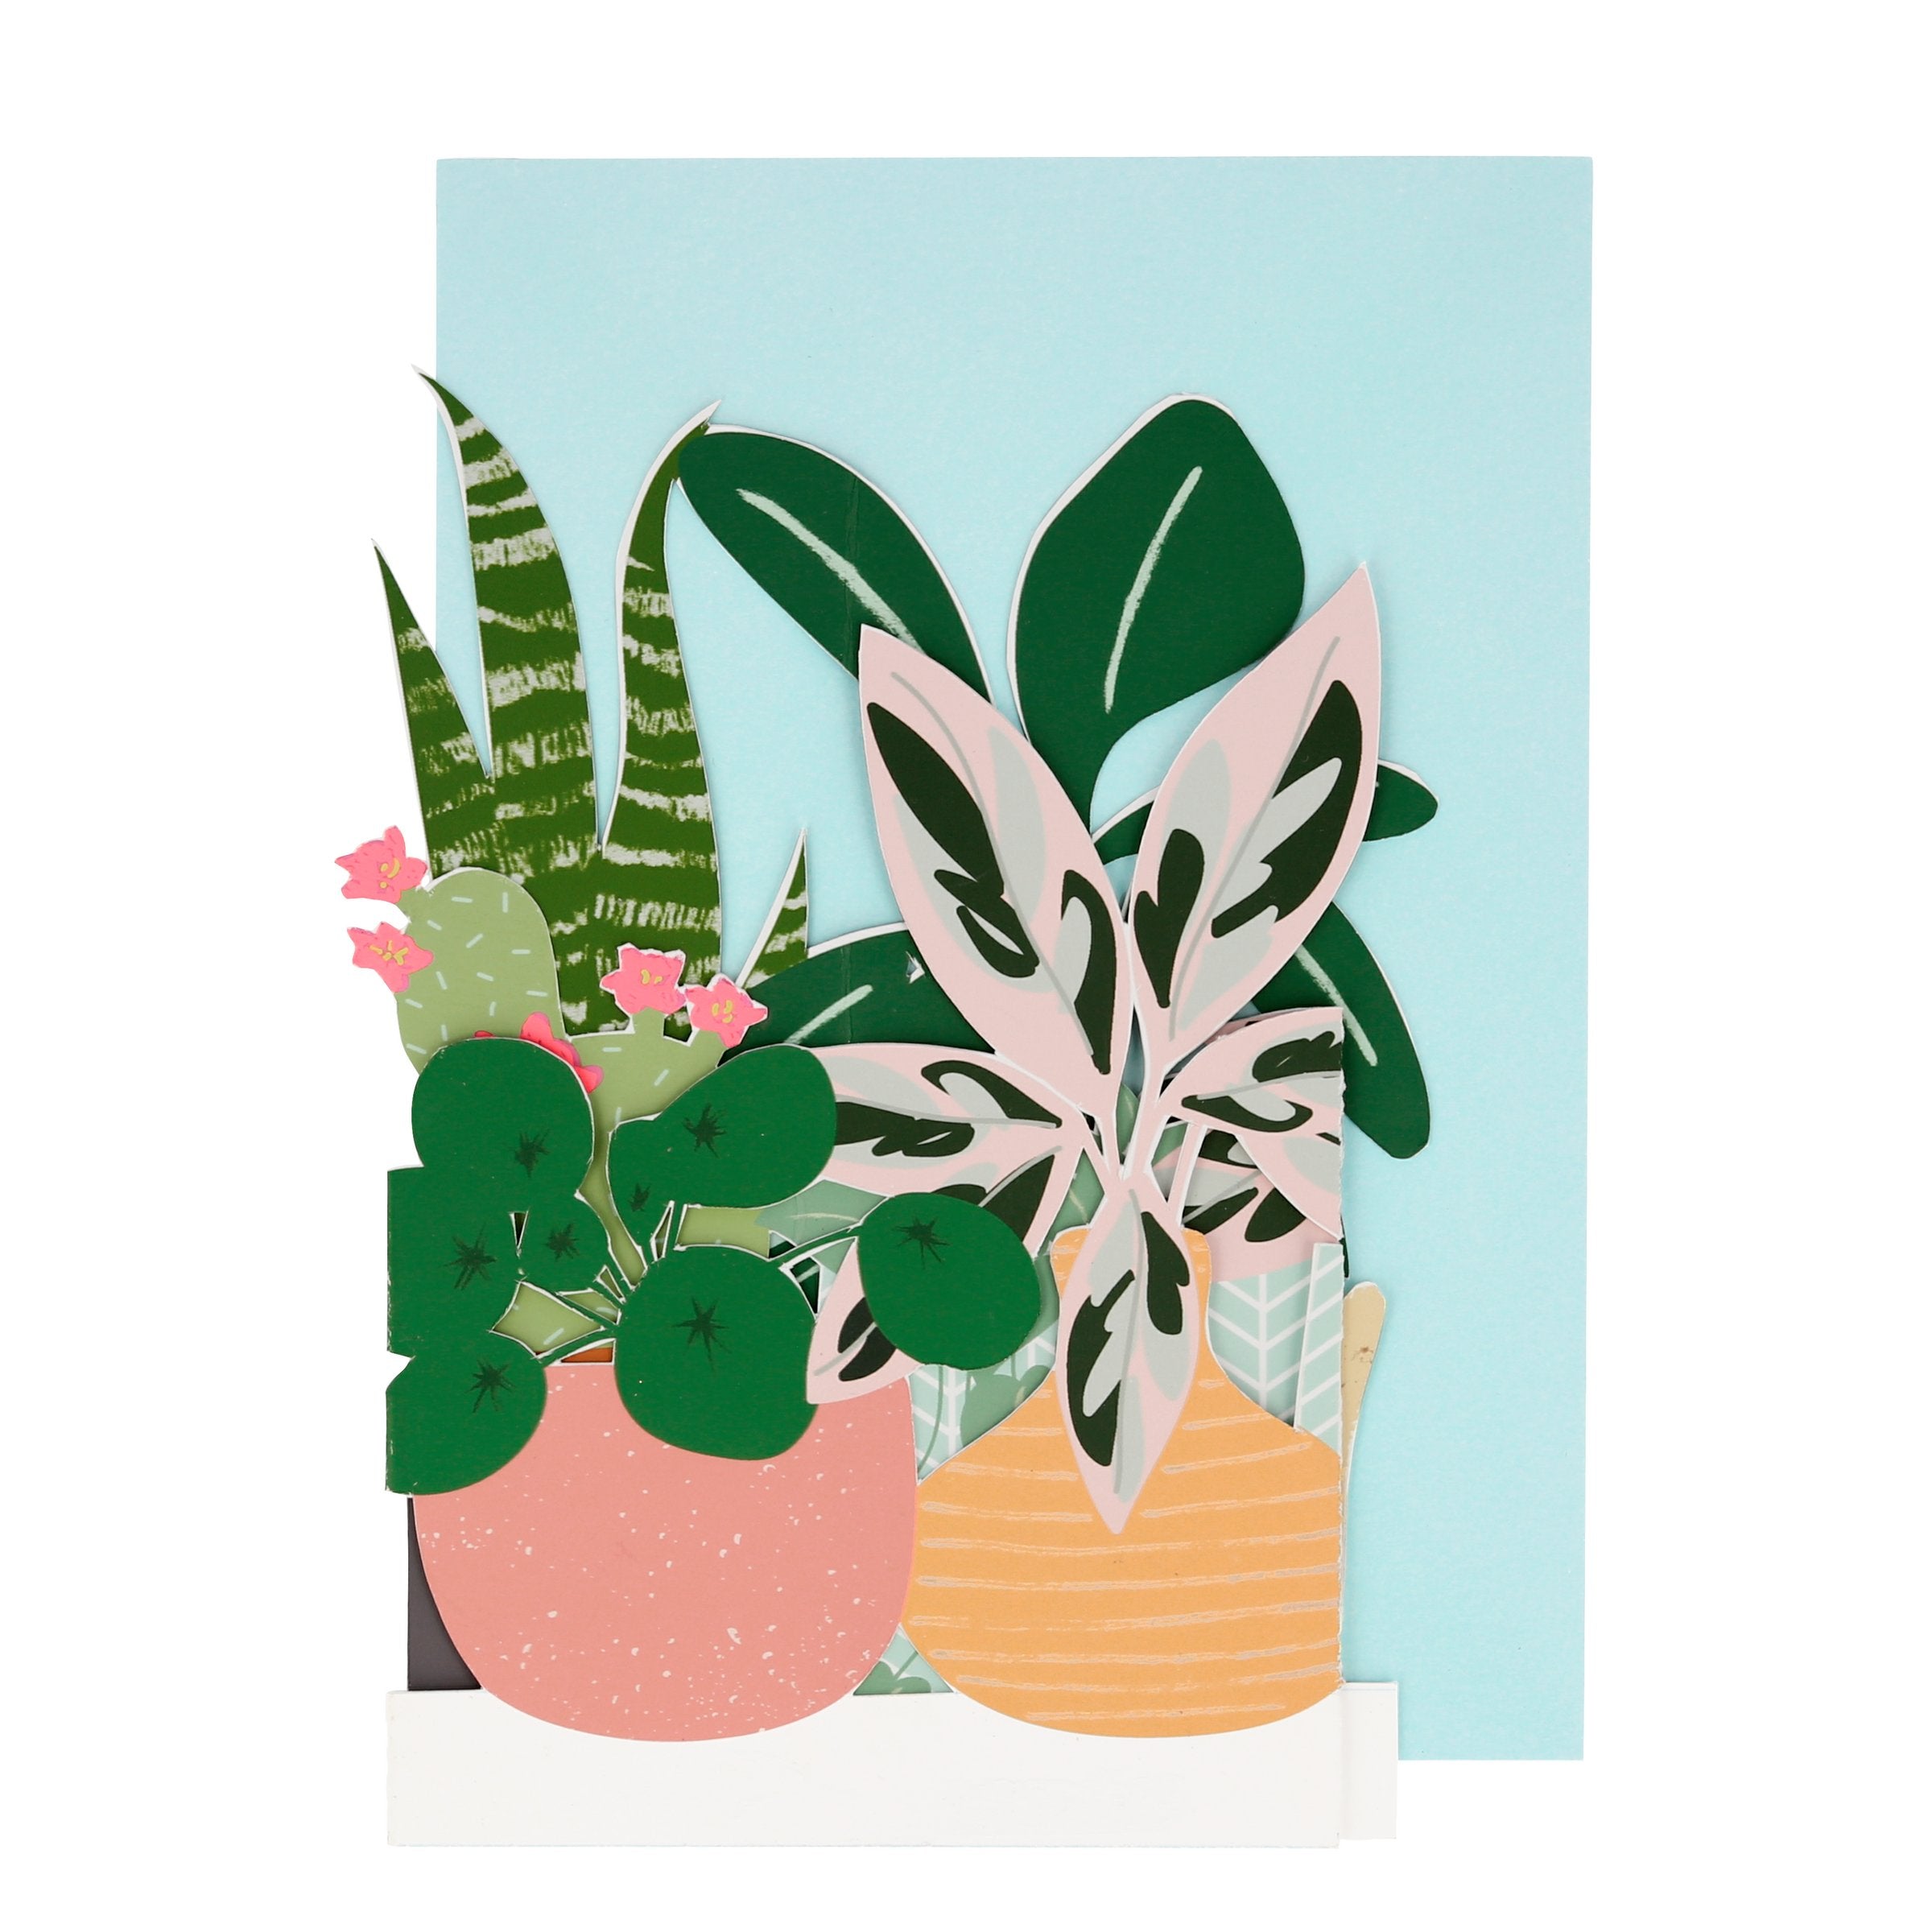 Send a message of your choice, in our blank card that opens up, to a special someone who loves plants.